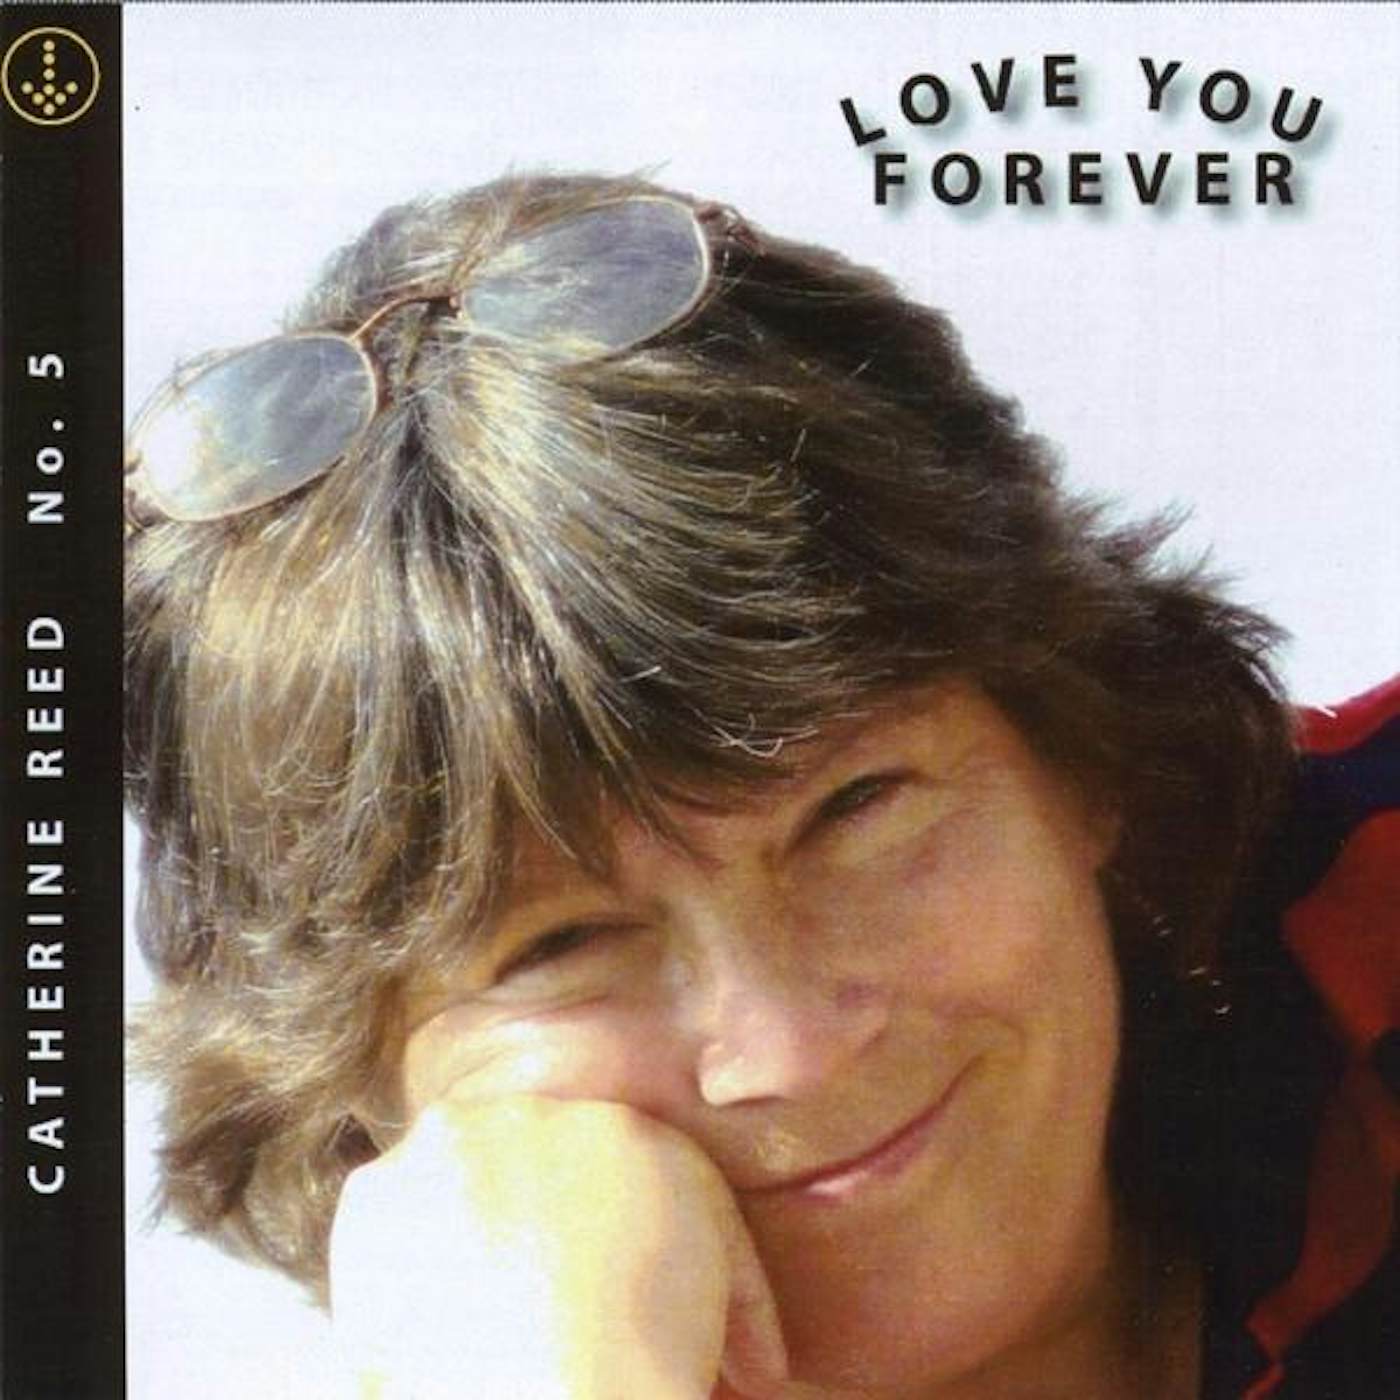 Catherine Reed LOVE YOU FOREVER 5 CD